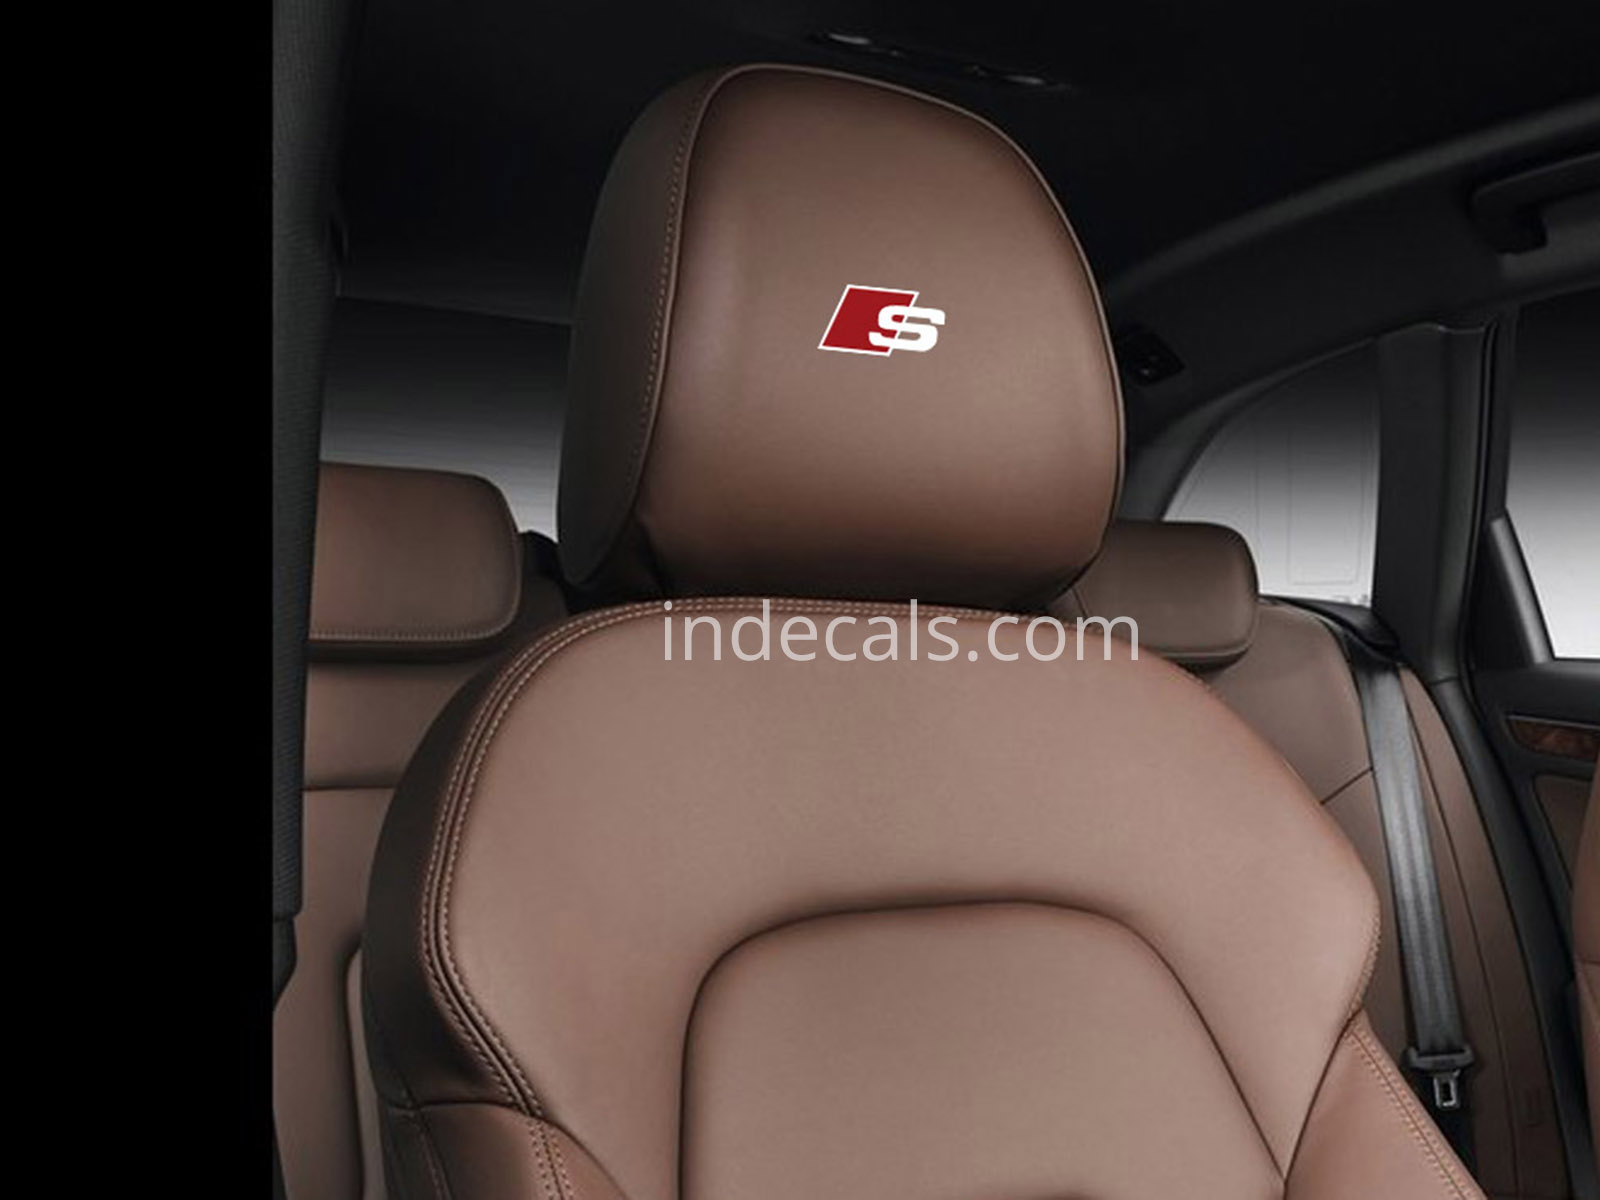 5 x Audi S-Line Stickers for Headrests - White + Red